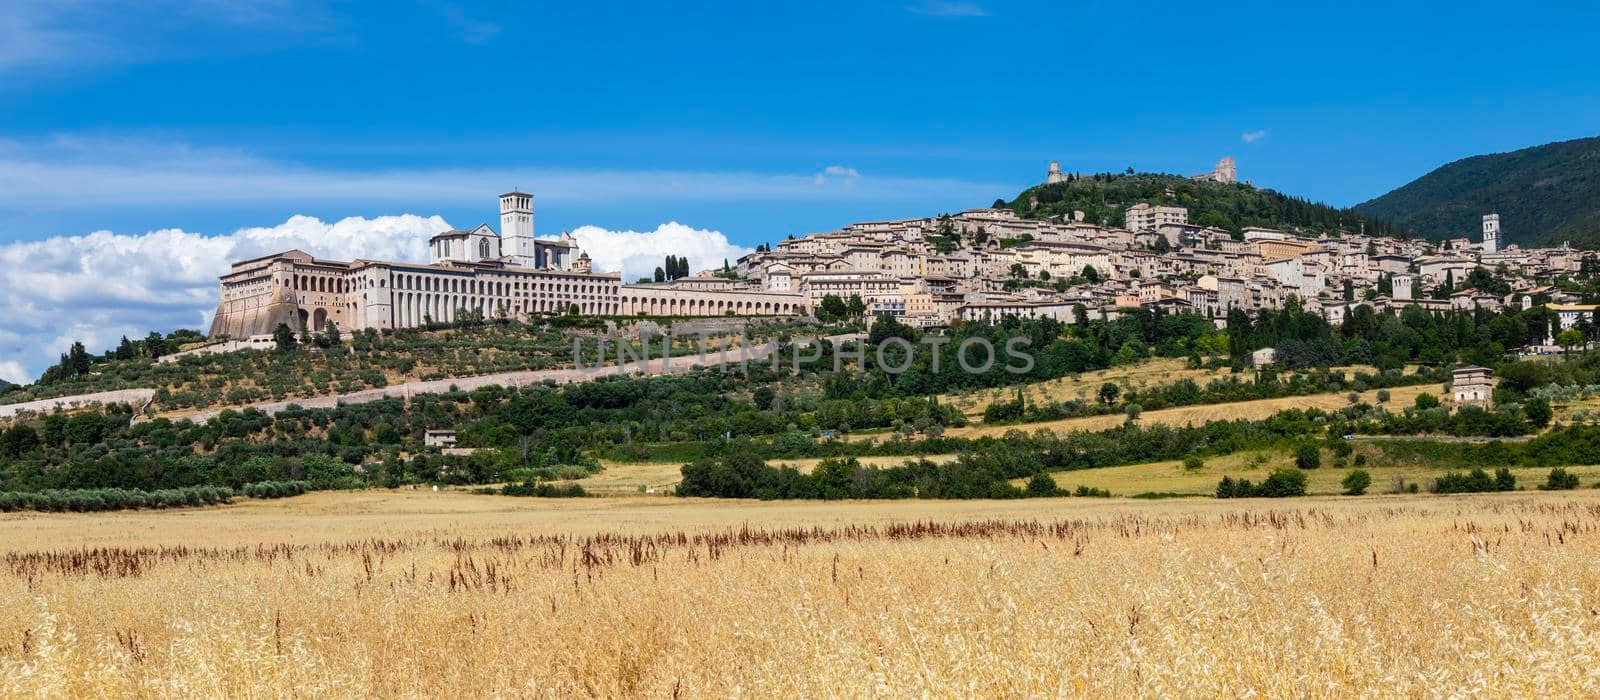 Assisi village in Umbria region, Italy. The town is famous for the most important Italian Basilica dedicated to St. Francis - San Francesco. by Perseomedusa